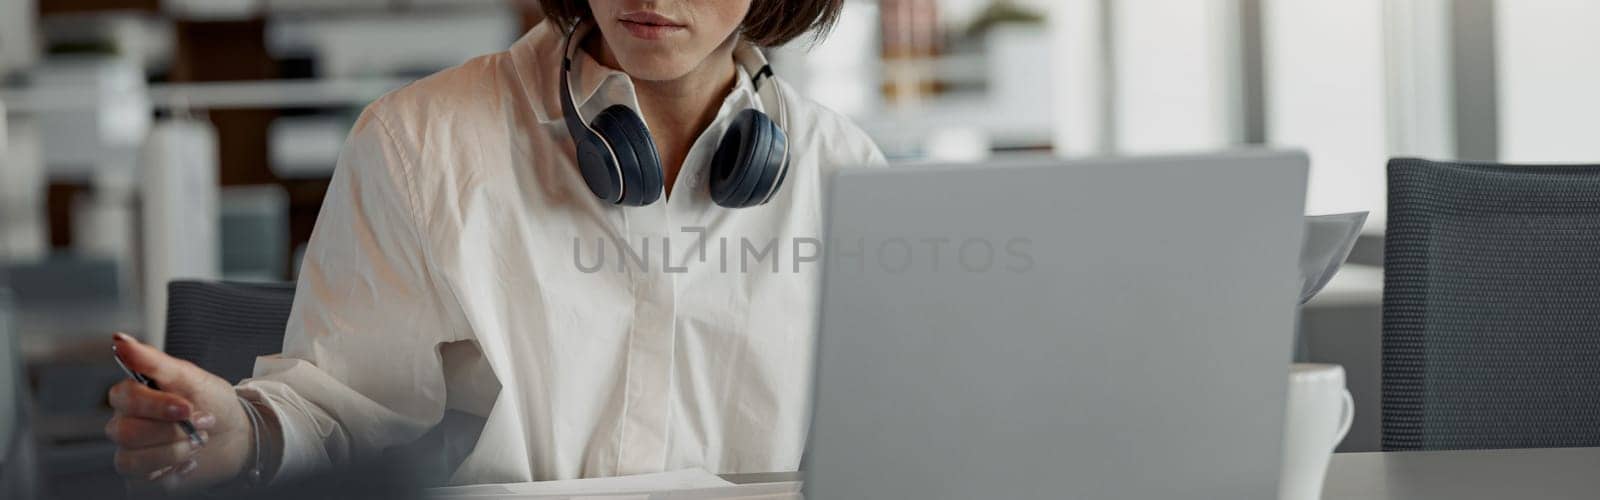 Business woman working laptop and making notes while sitting in modern office. Blurred background